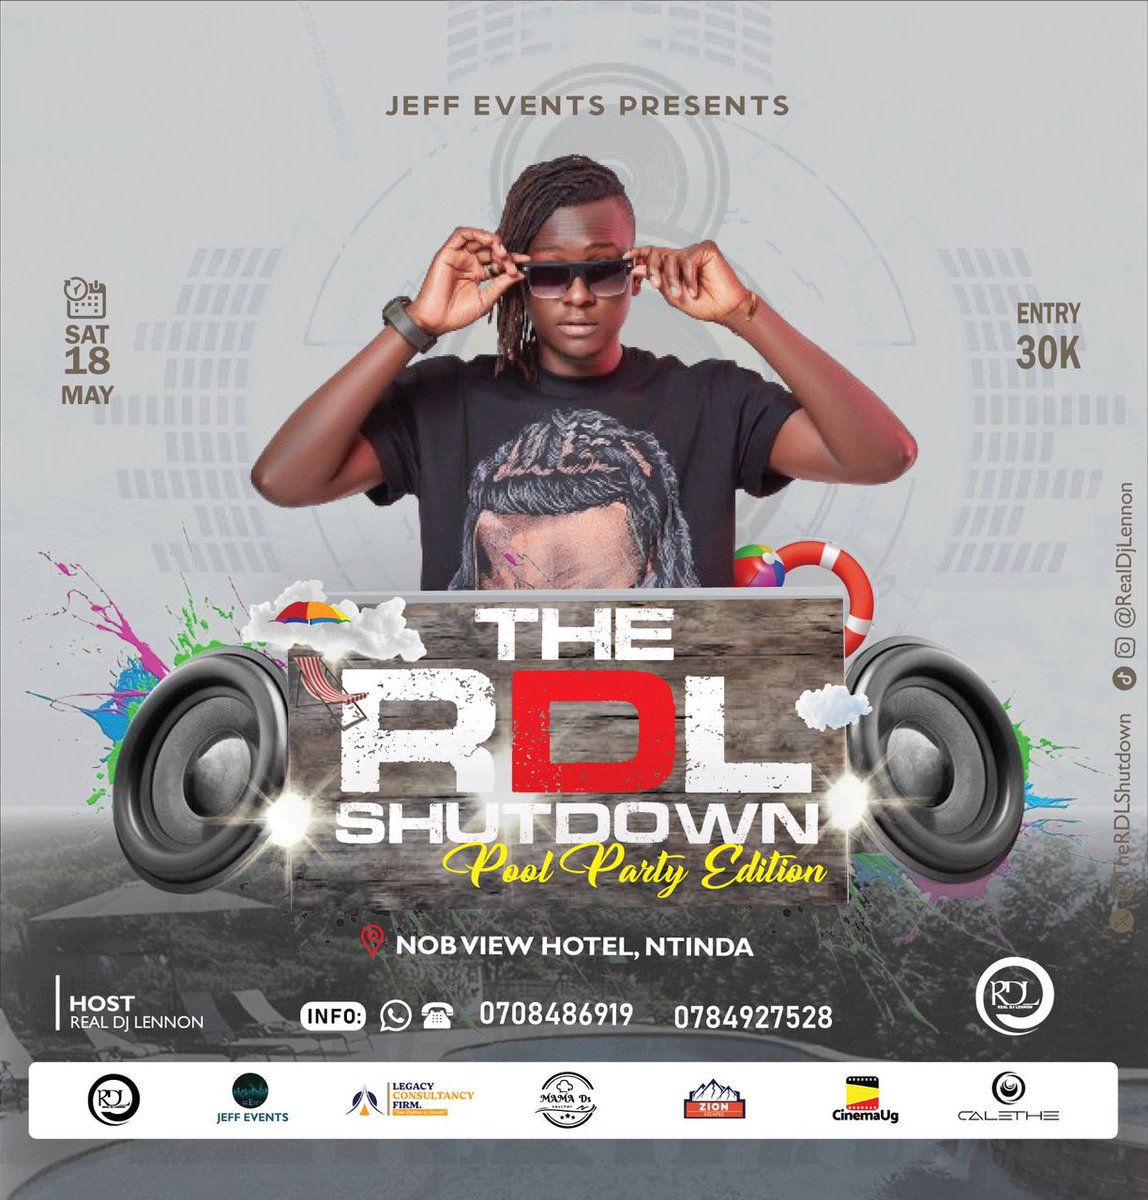 Our favorite tweep /dj @TheRDLShutdown is gonna be live on 18th May at Nob view hotel ntinda. This one we all know him on these streets.